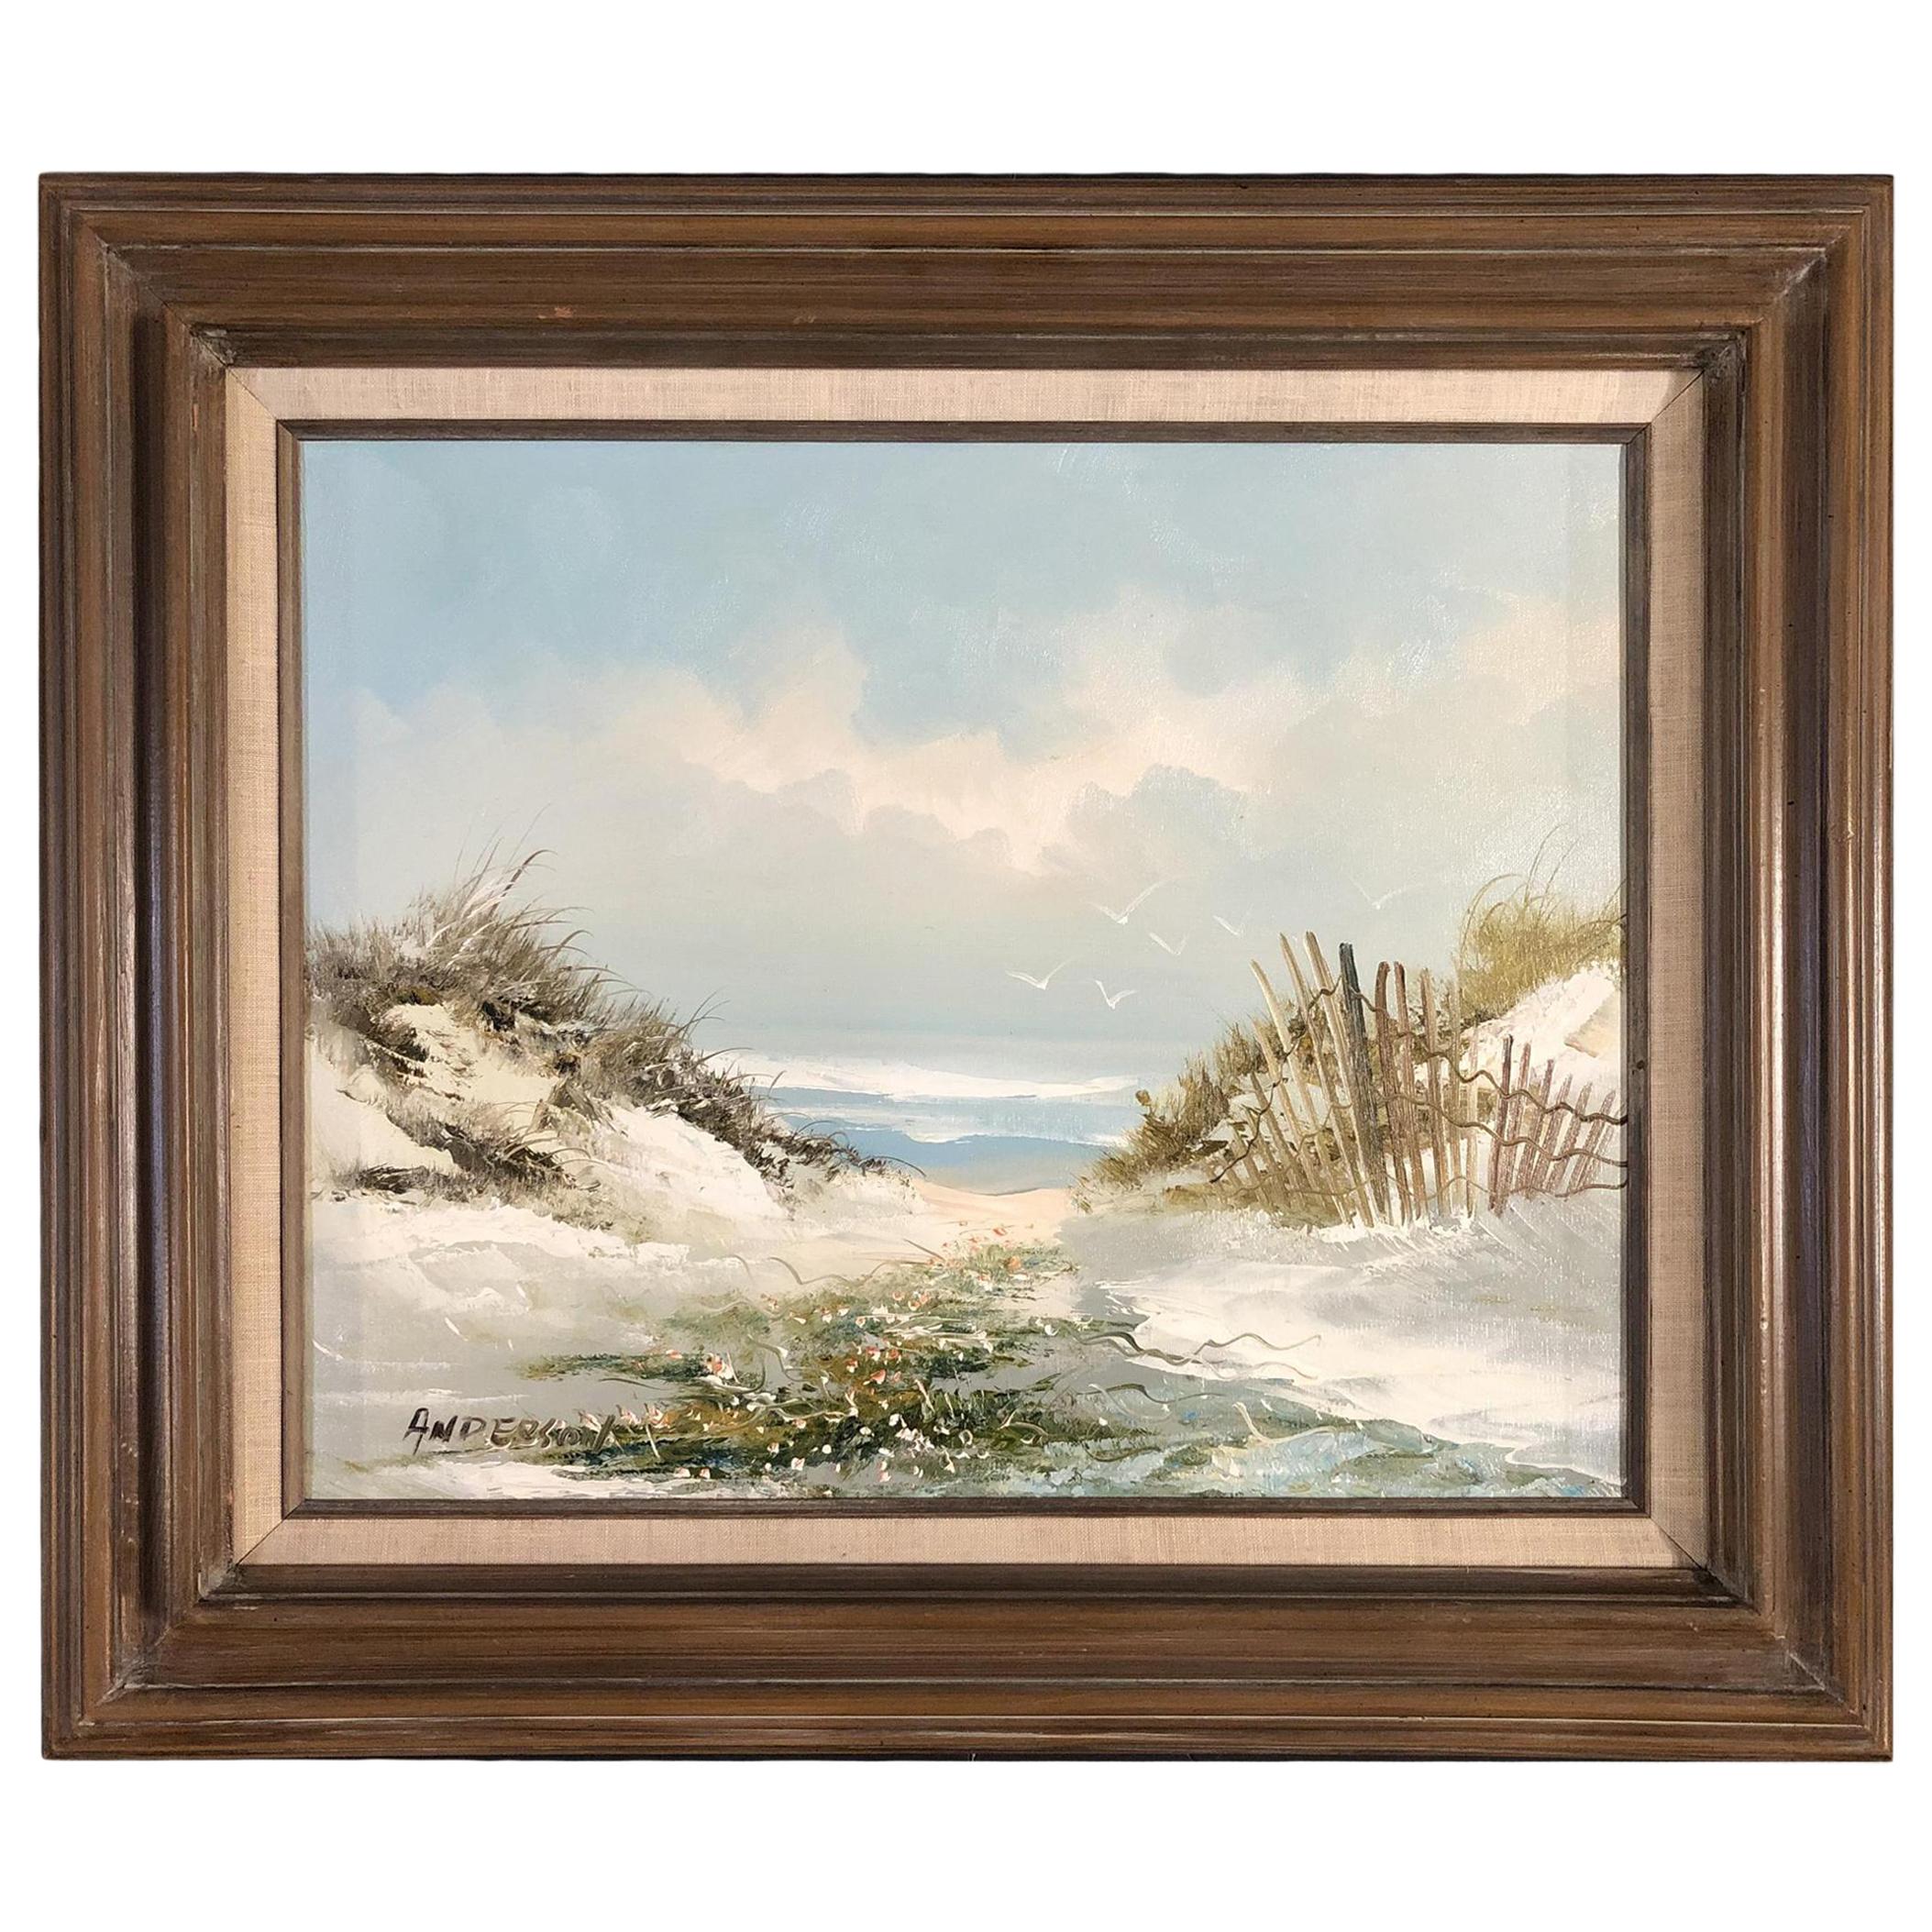 Midcentury Beach Scenic Oil on Board in Original Frame, Post War Signed